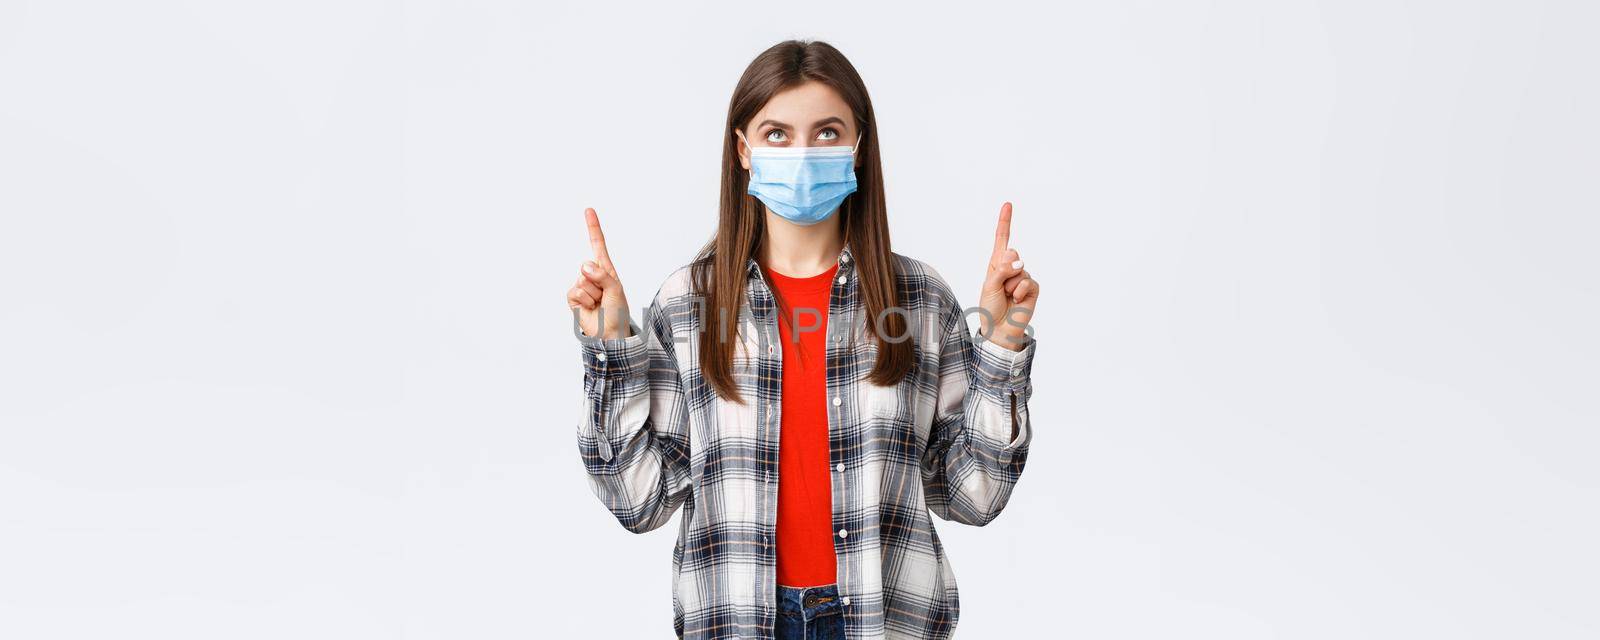 Coronavirus outbreak, leisure on quarantine, social distancing and emotions concept. Interested serious young woman in medical mask and casual outfit, looking and pointing up banner.